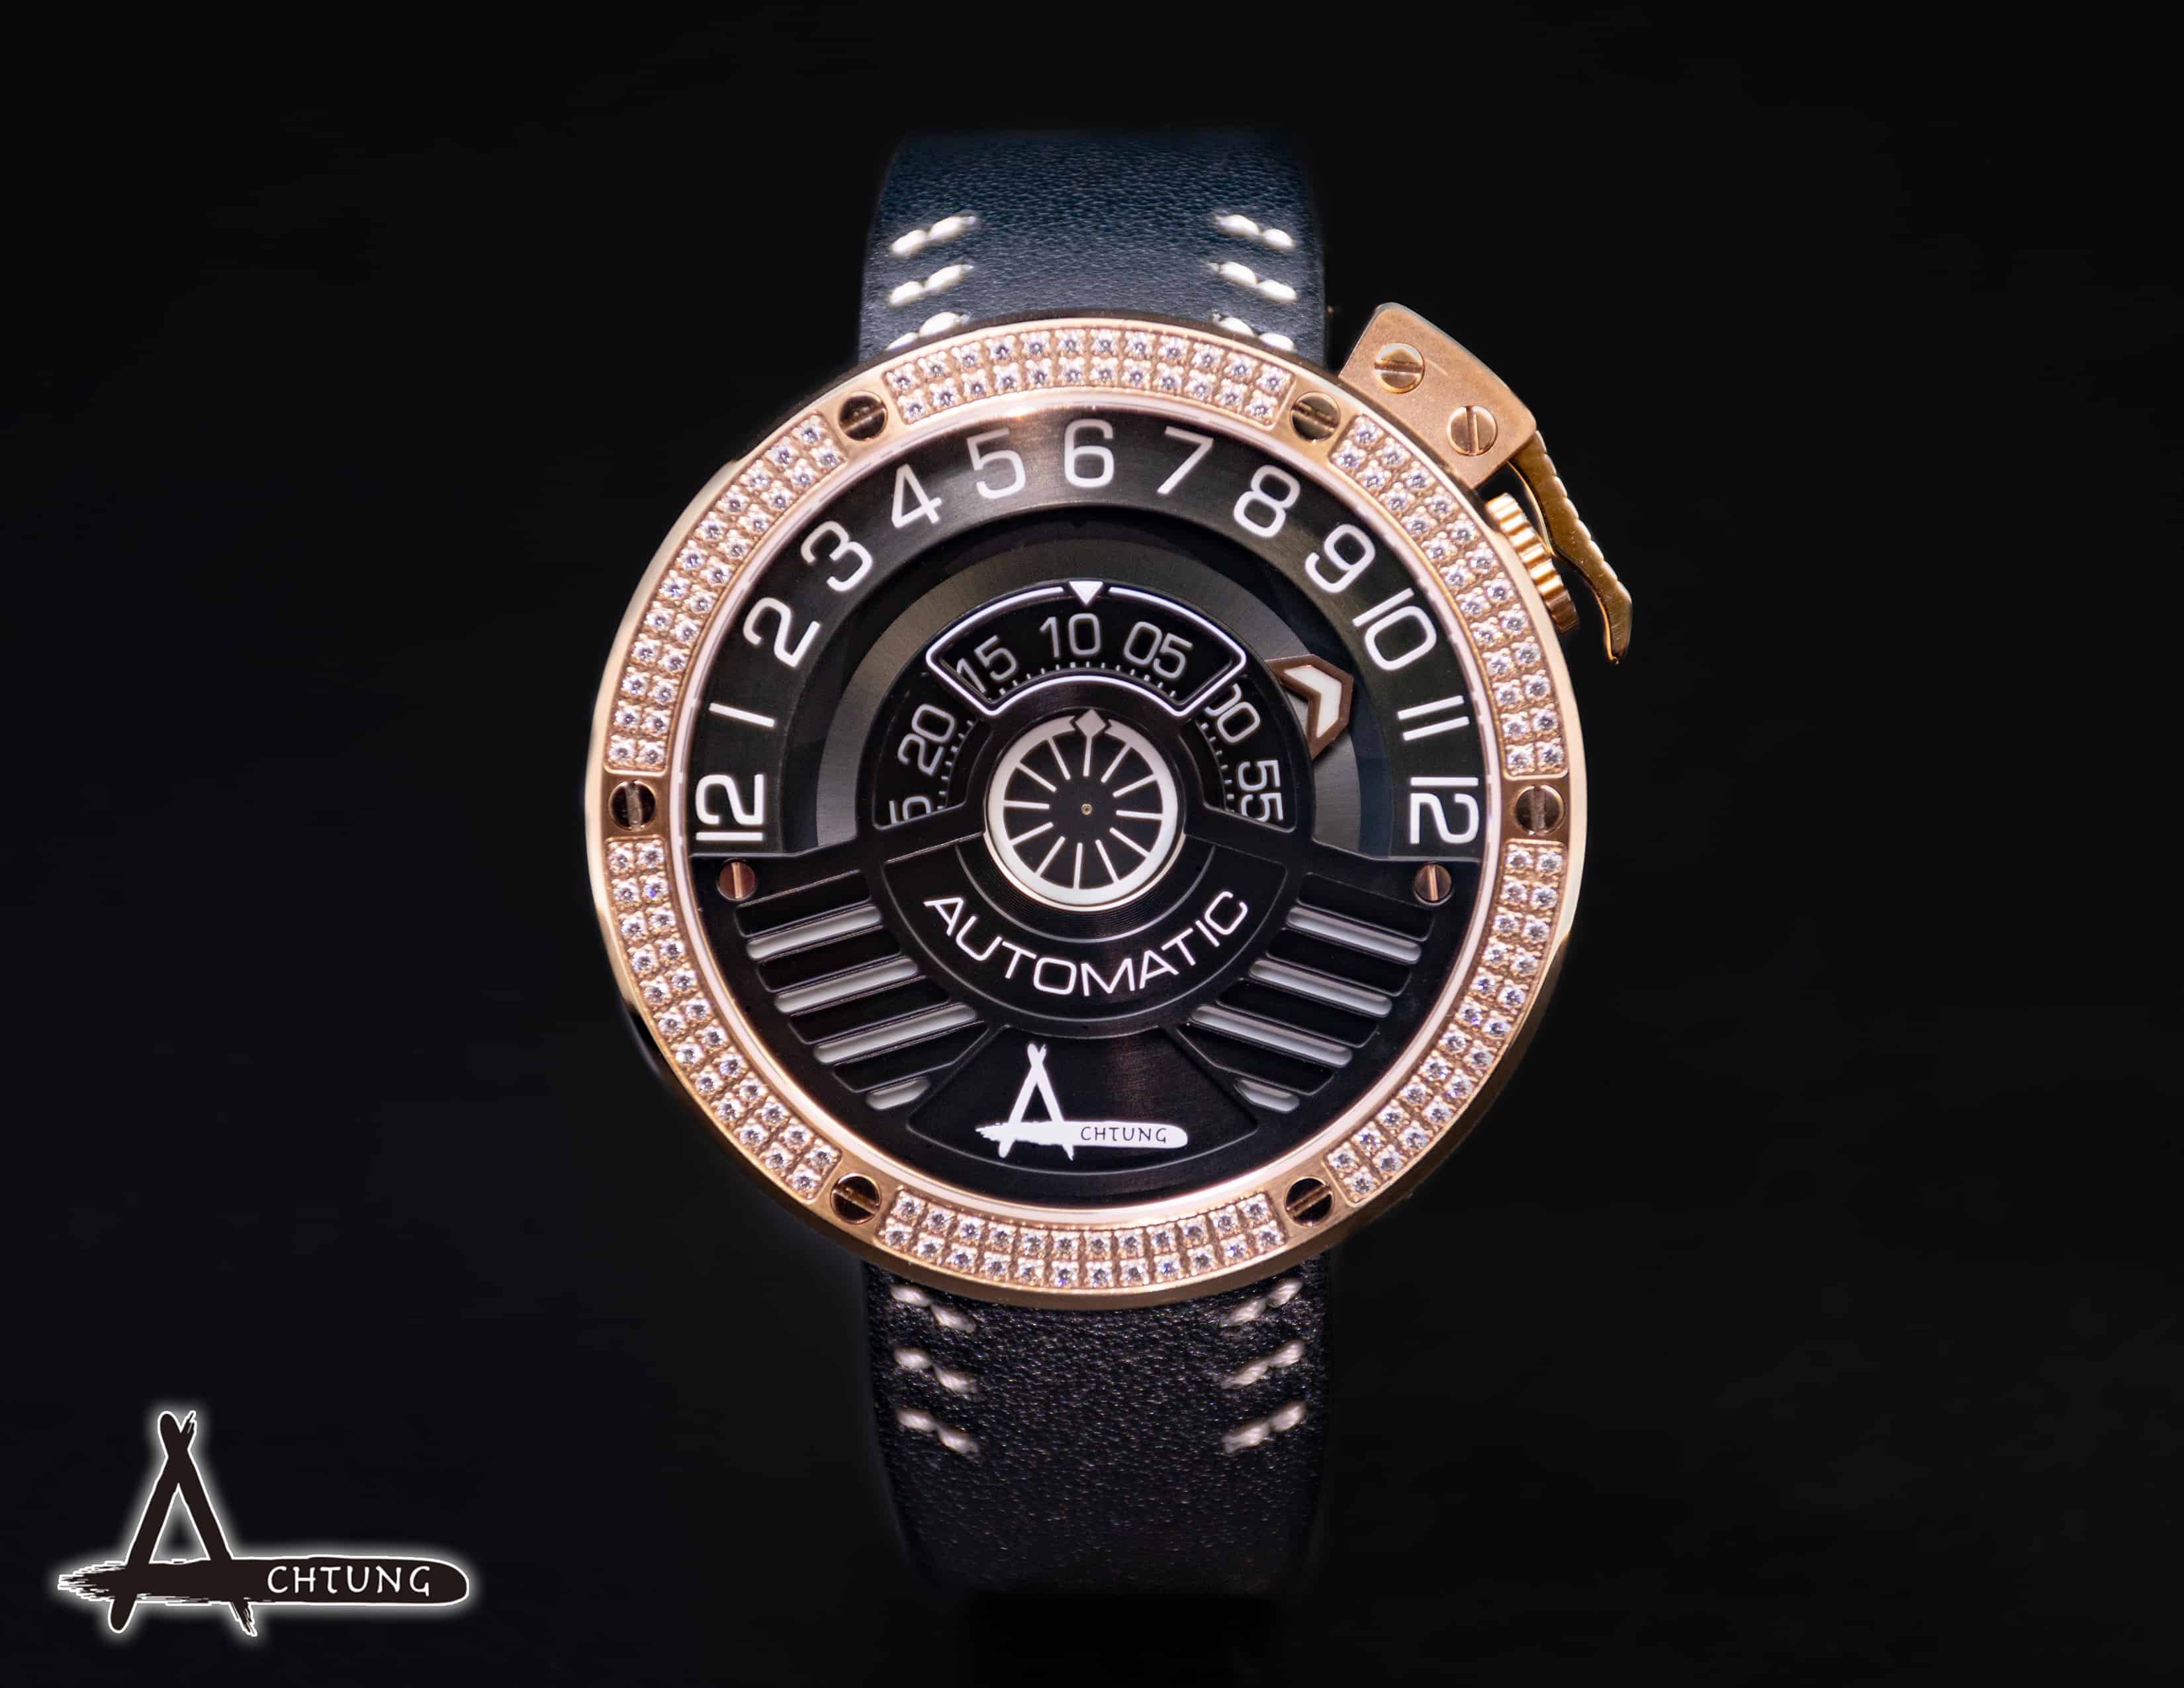 Achtung Bomb Crystal Rose Gold / Black